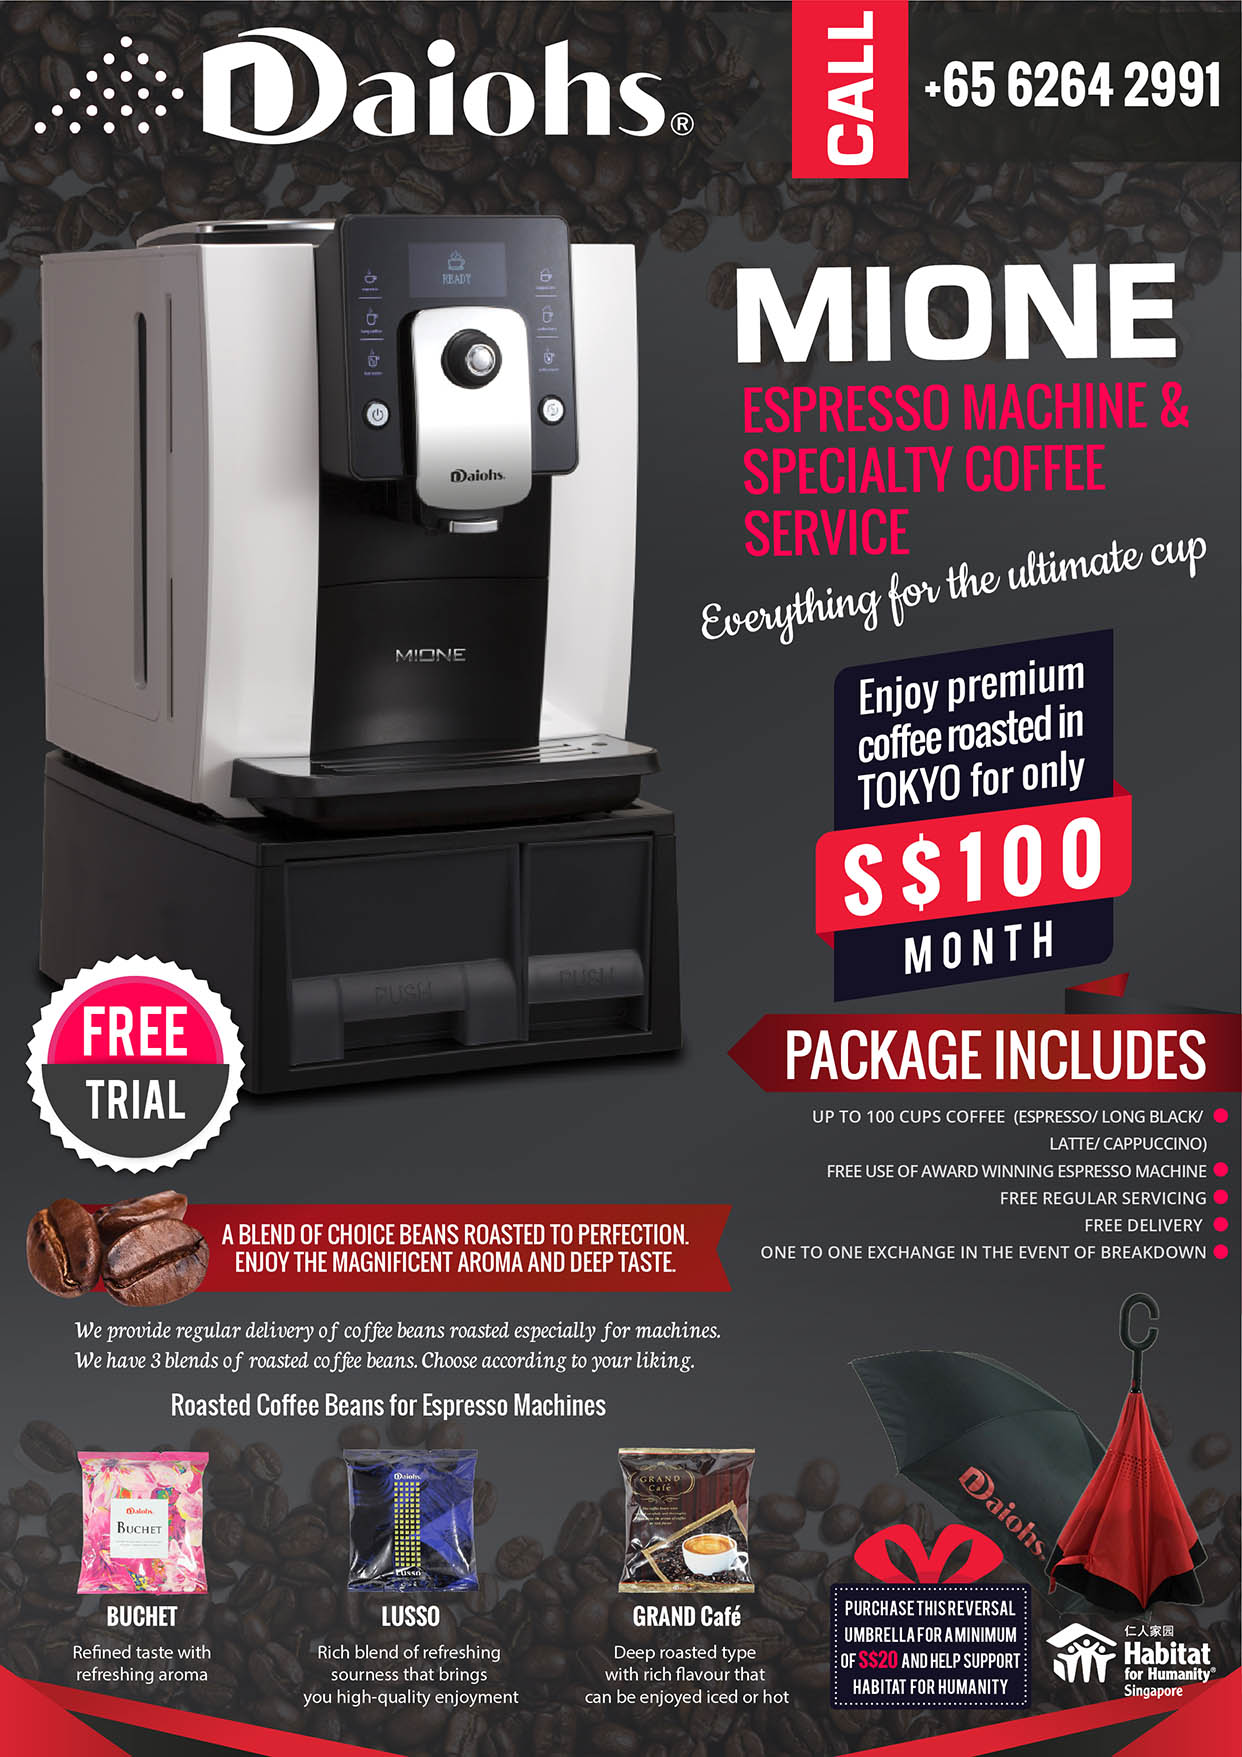 Flyer Design for Coffee and Tea Vending Machine